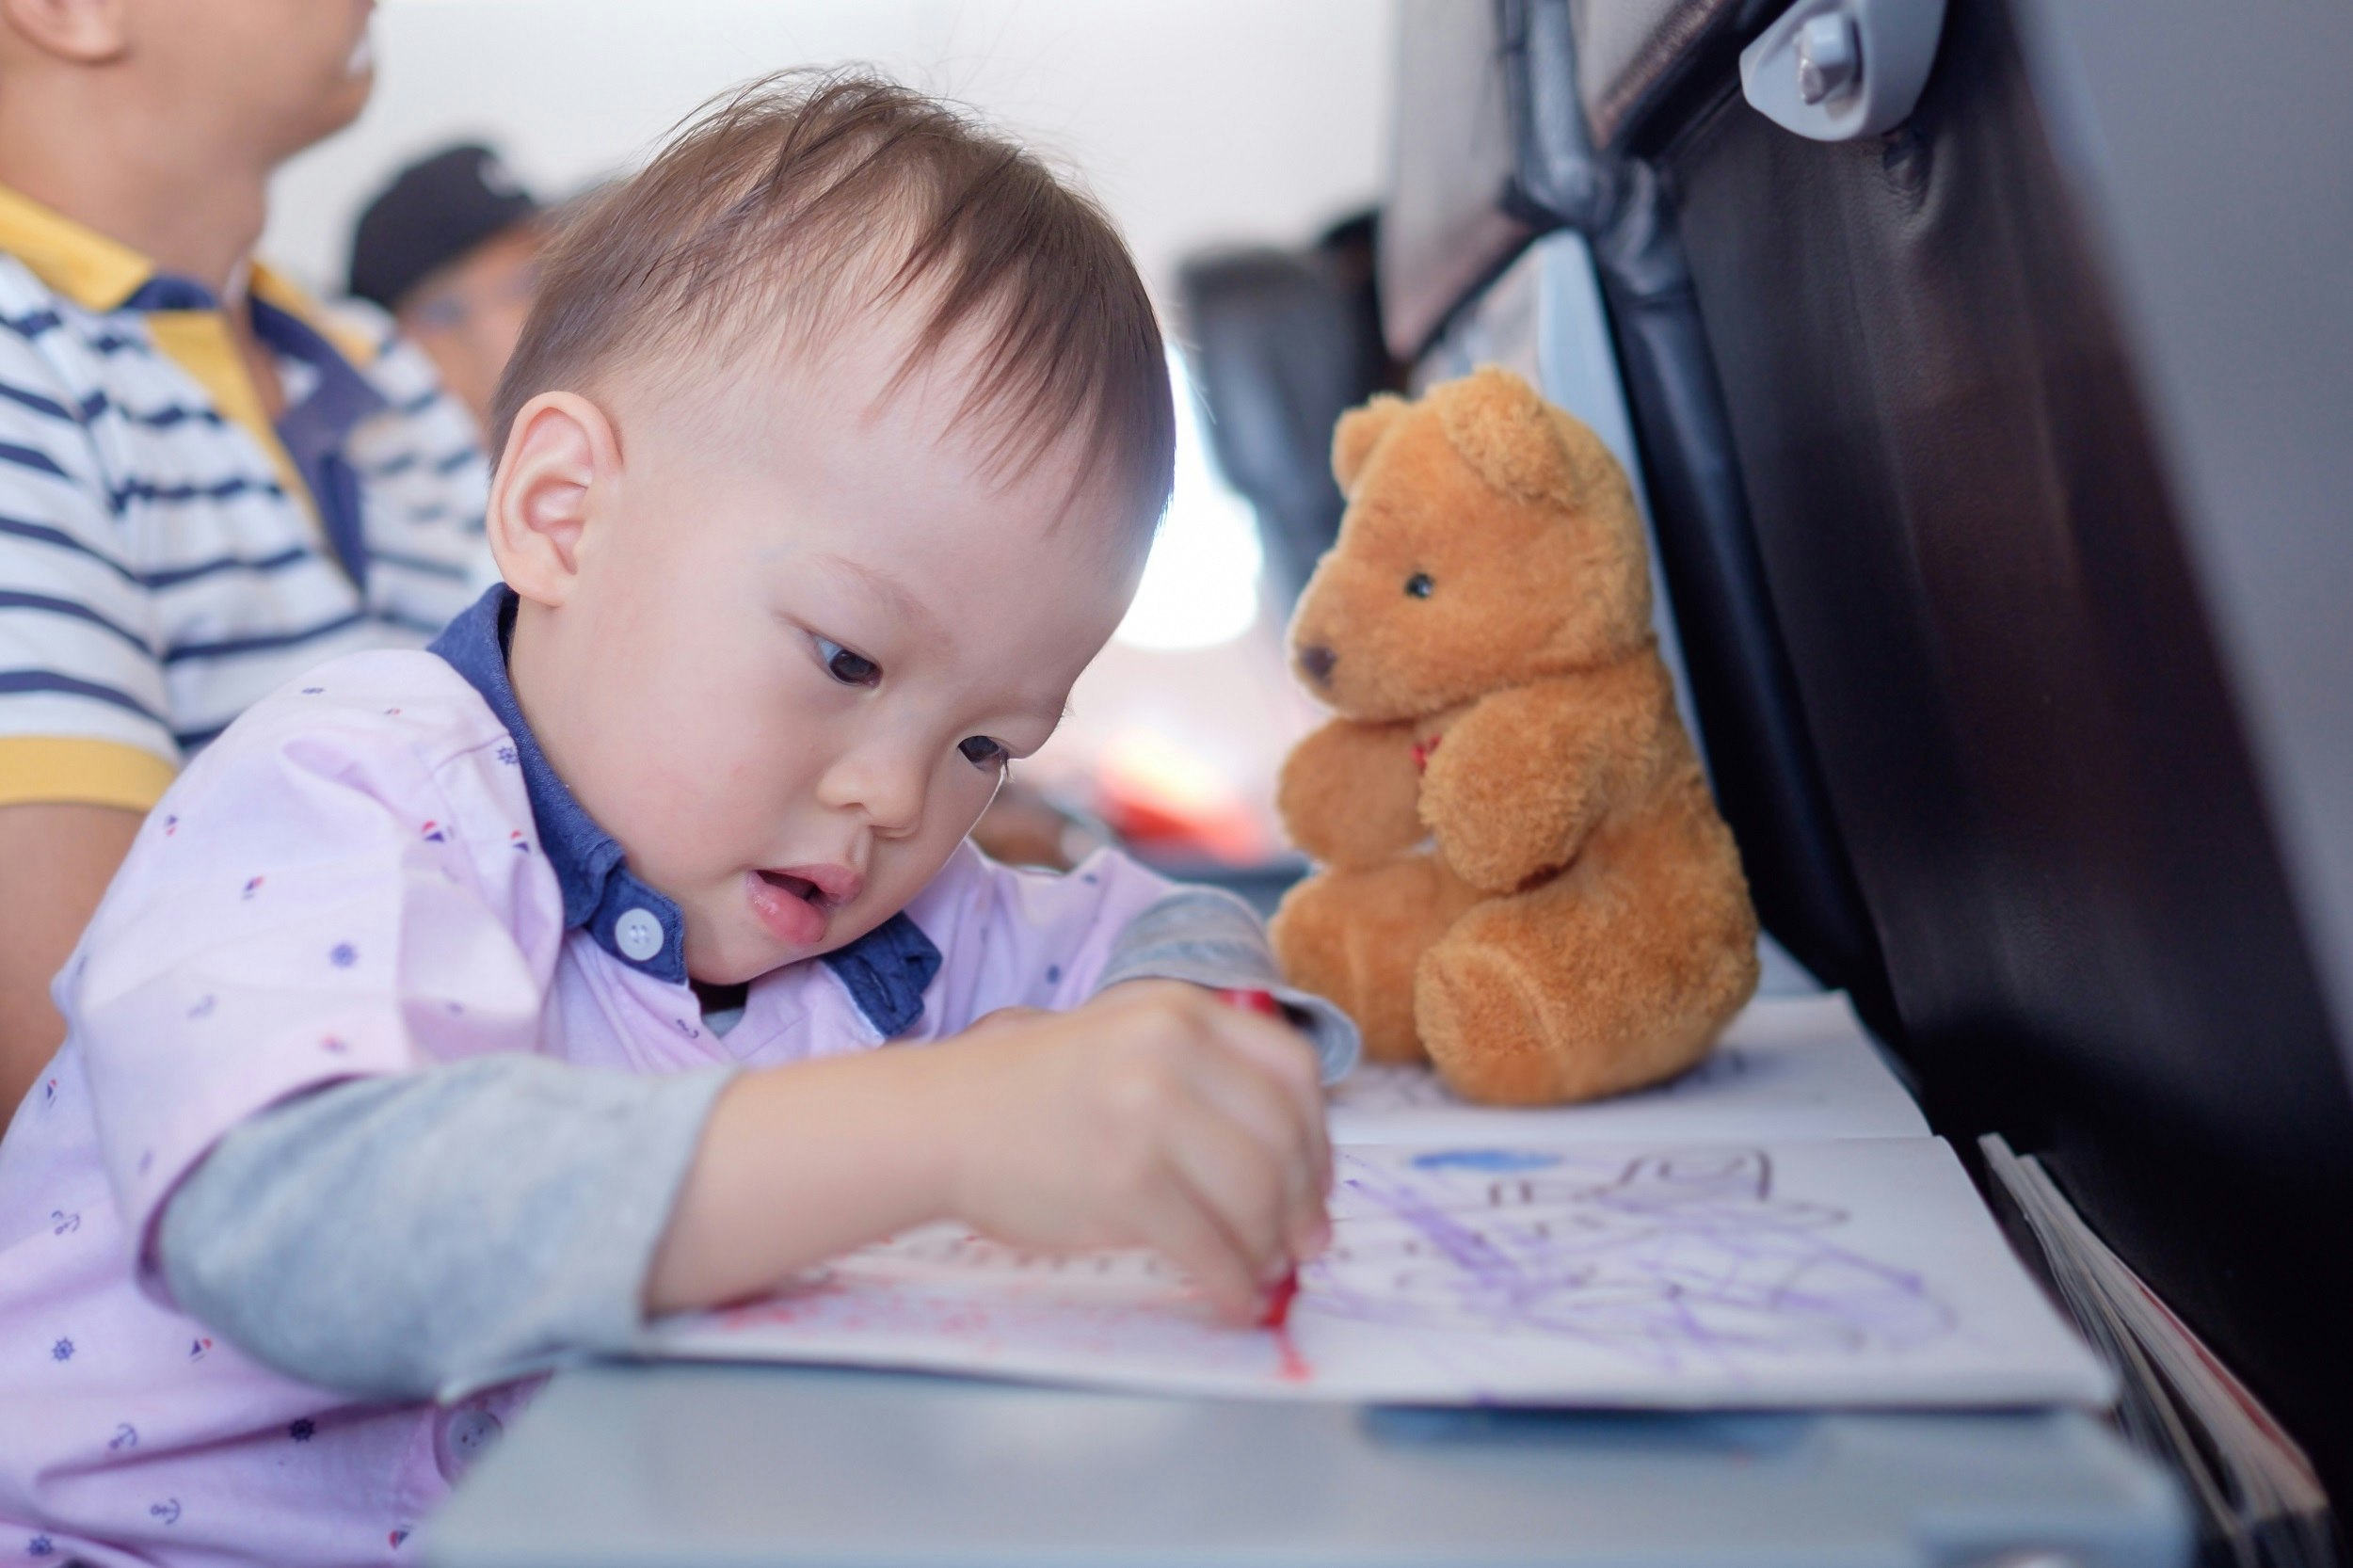 A toddler does some colouring on the table in an economy seat on a plane